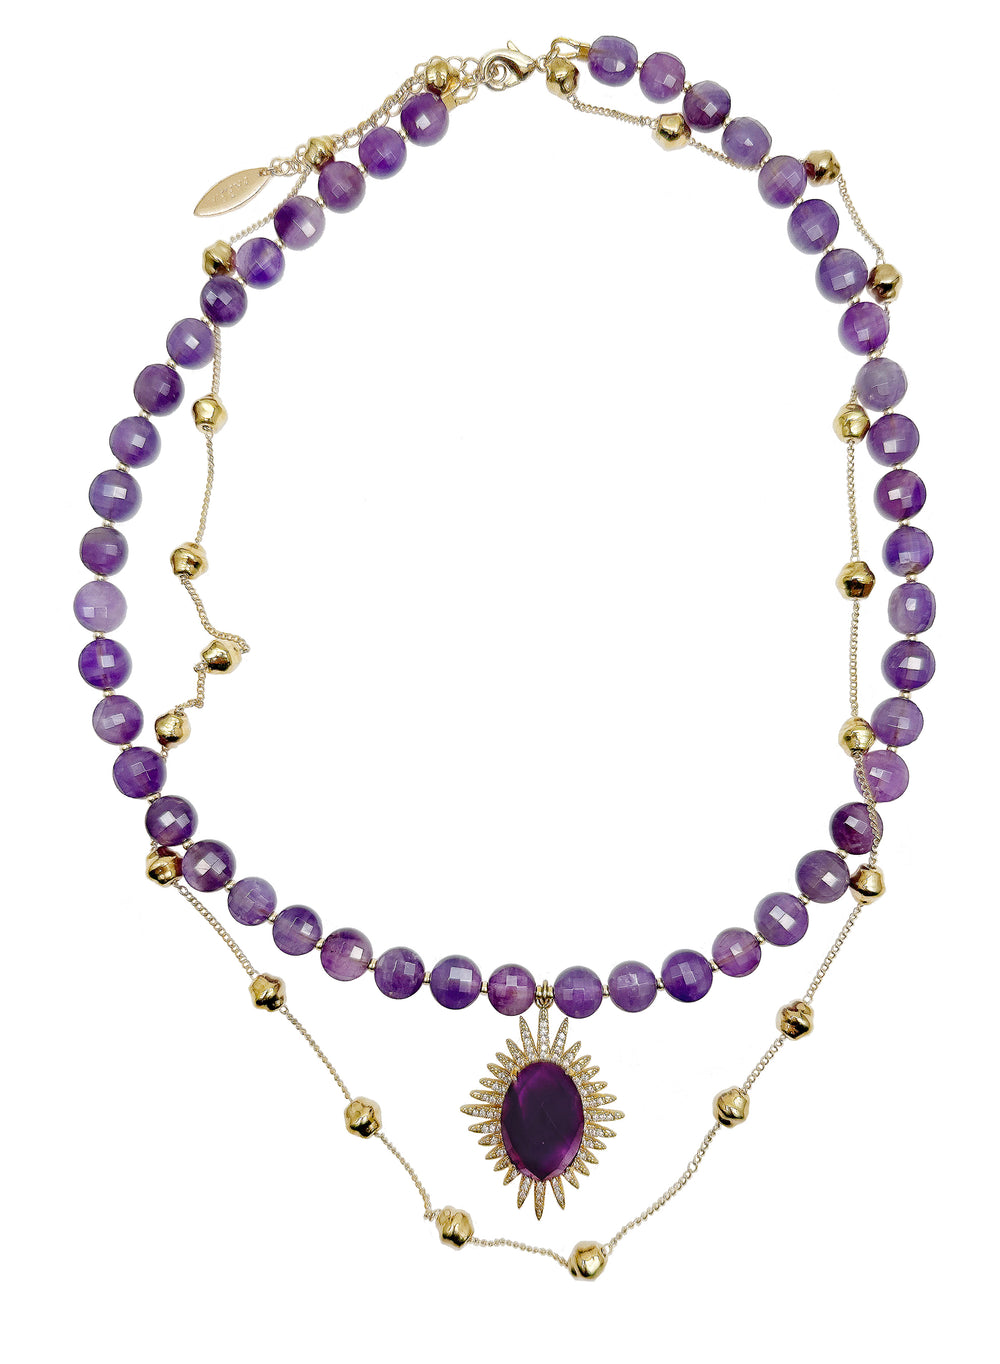 Elevate your style with the rich purple hues of amethyst, known for its calming energy and stunning aesthetics.